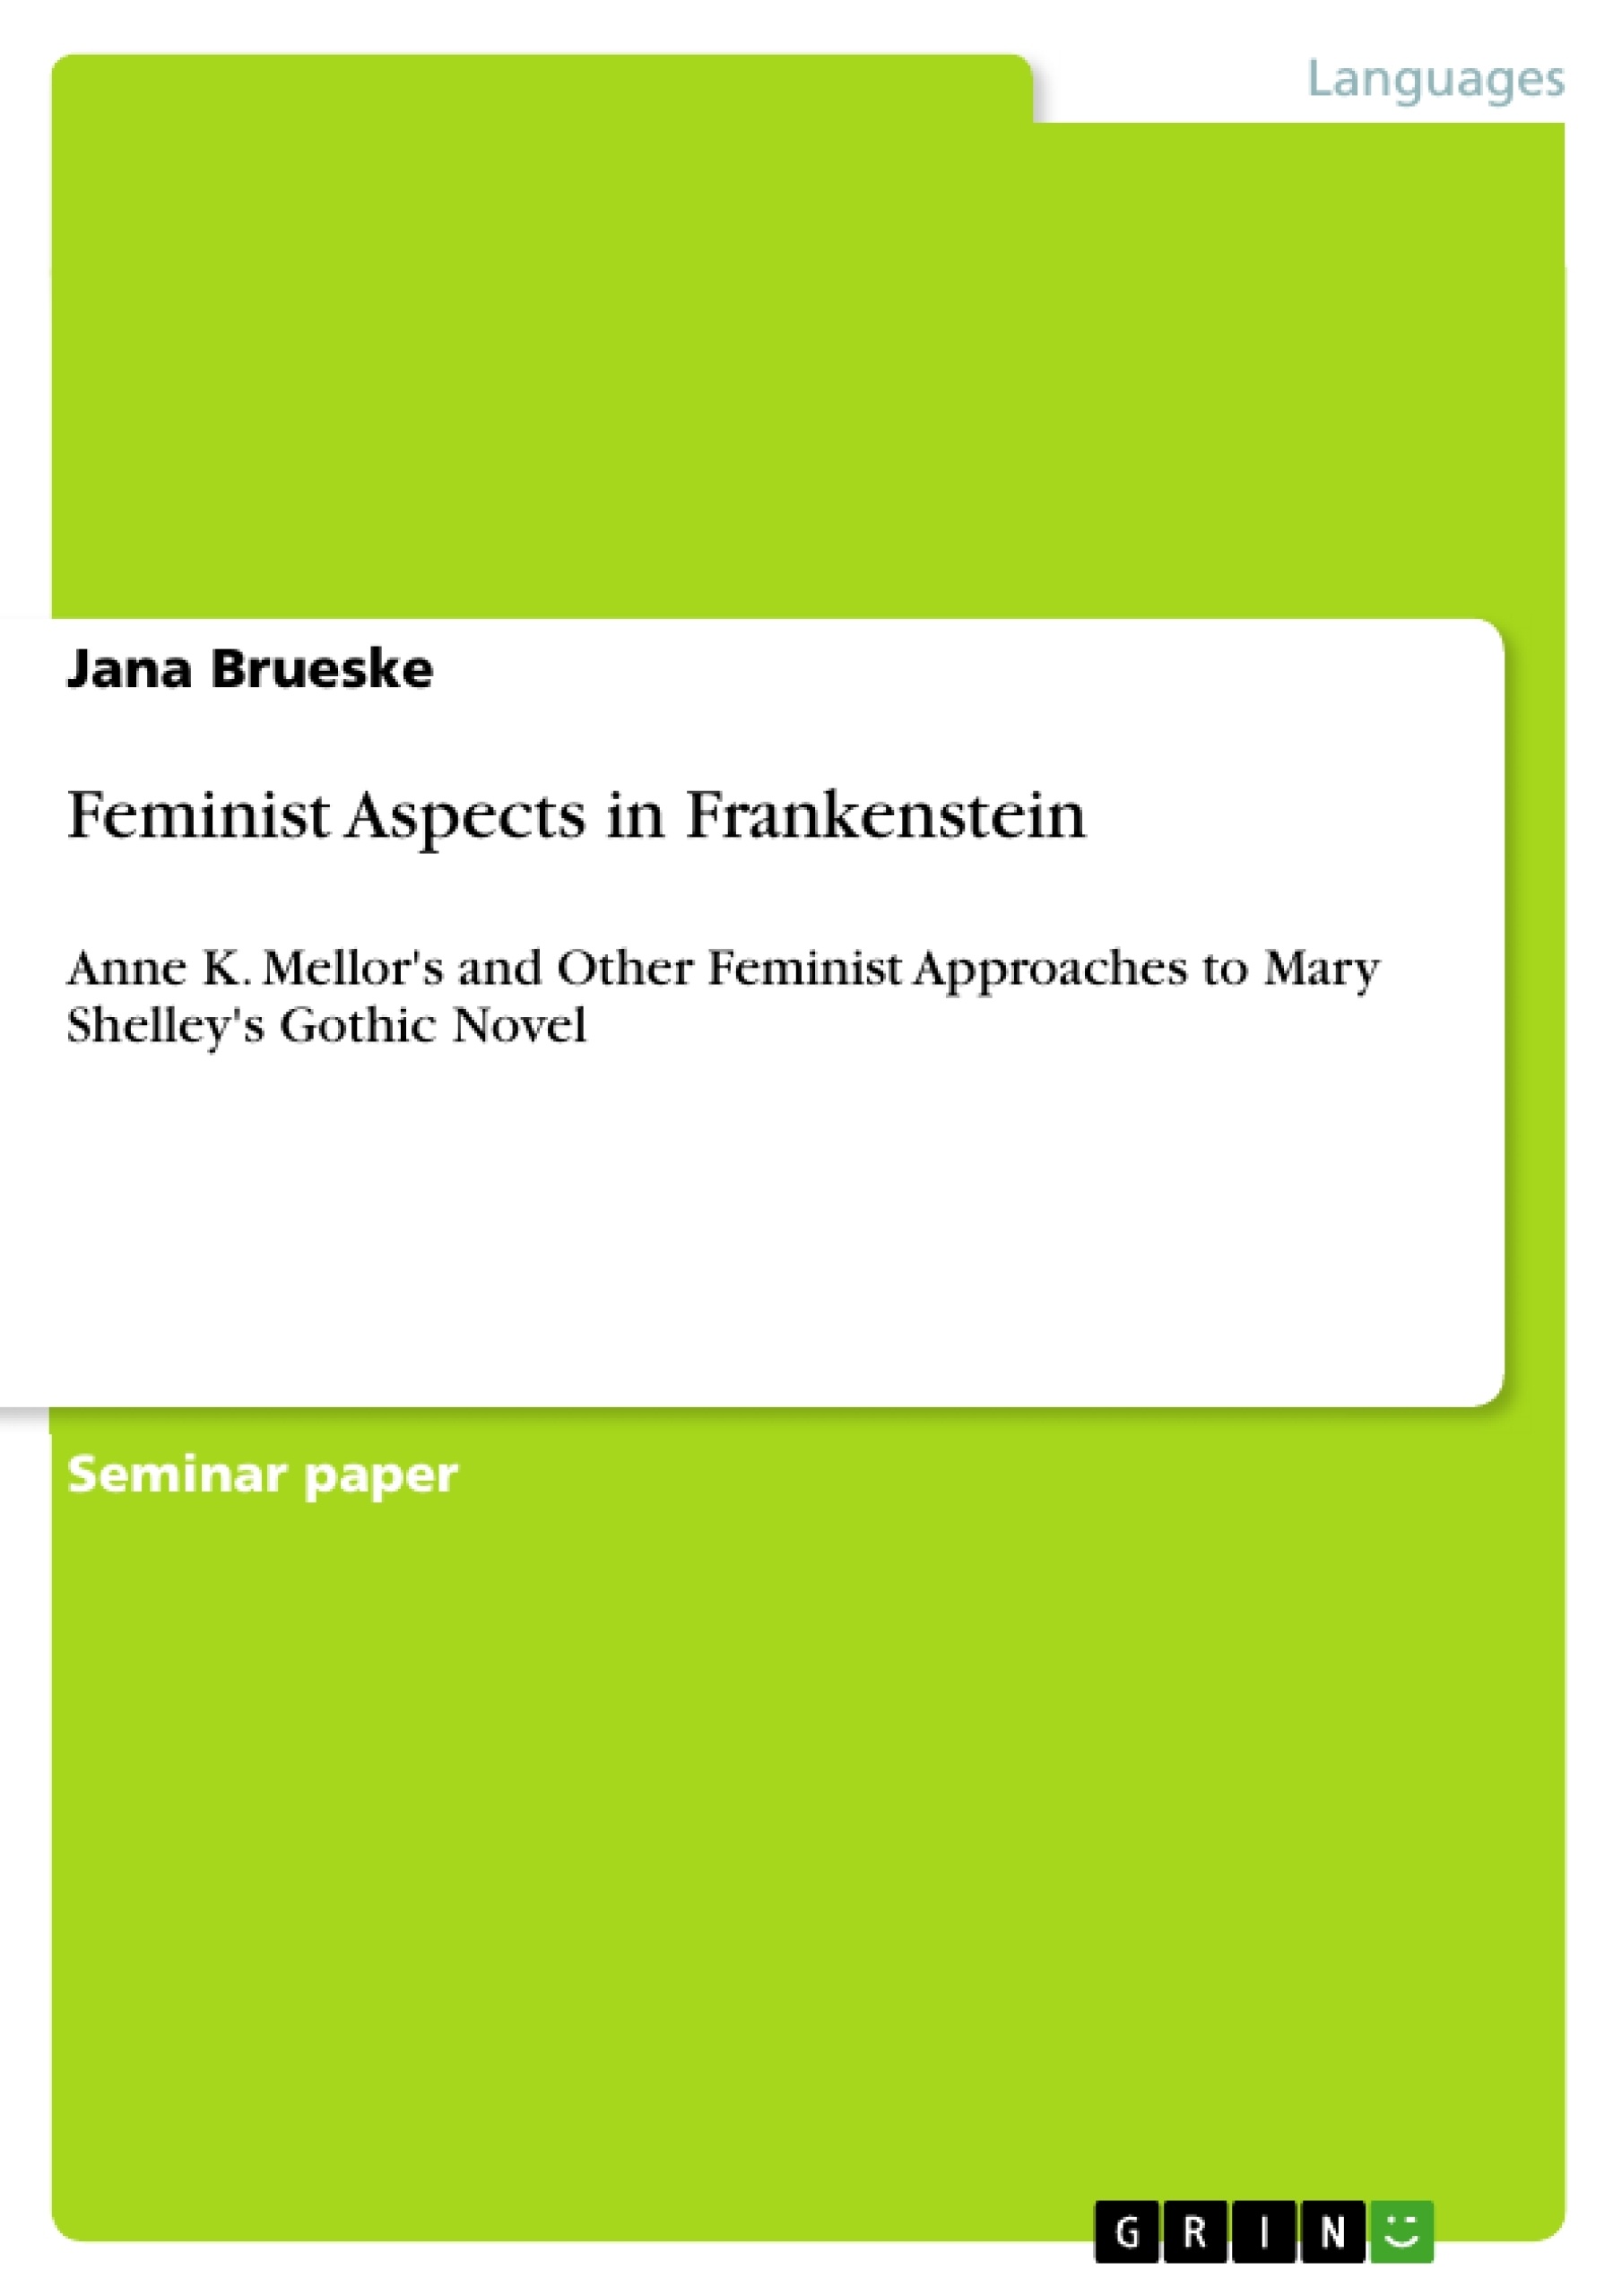 thesis on feminism in english literature pdf